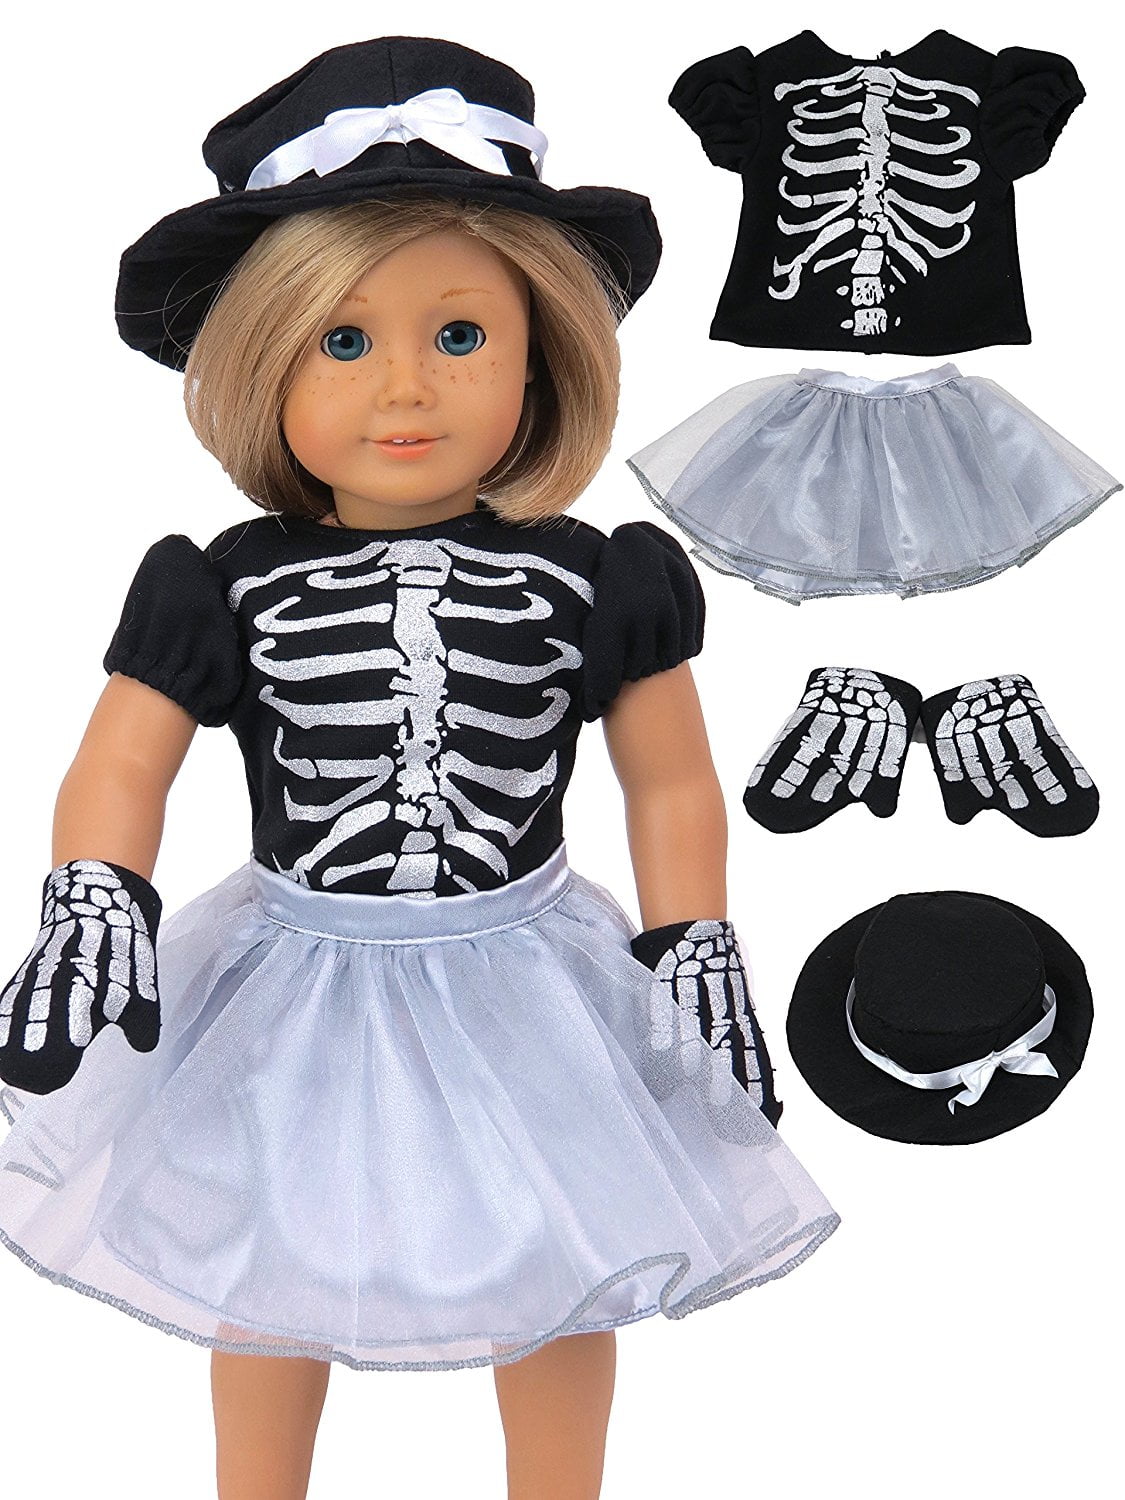 American Girl Truly Me SKELETON OUTFIT for dolls~ Halloween Costume 